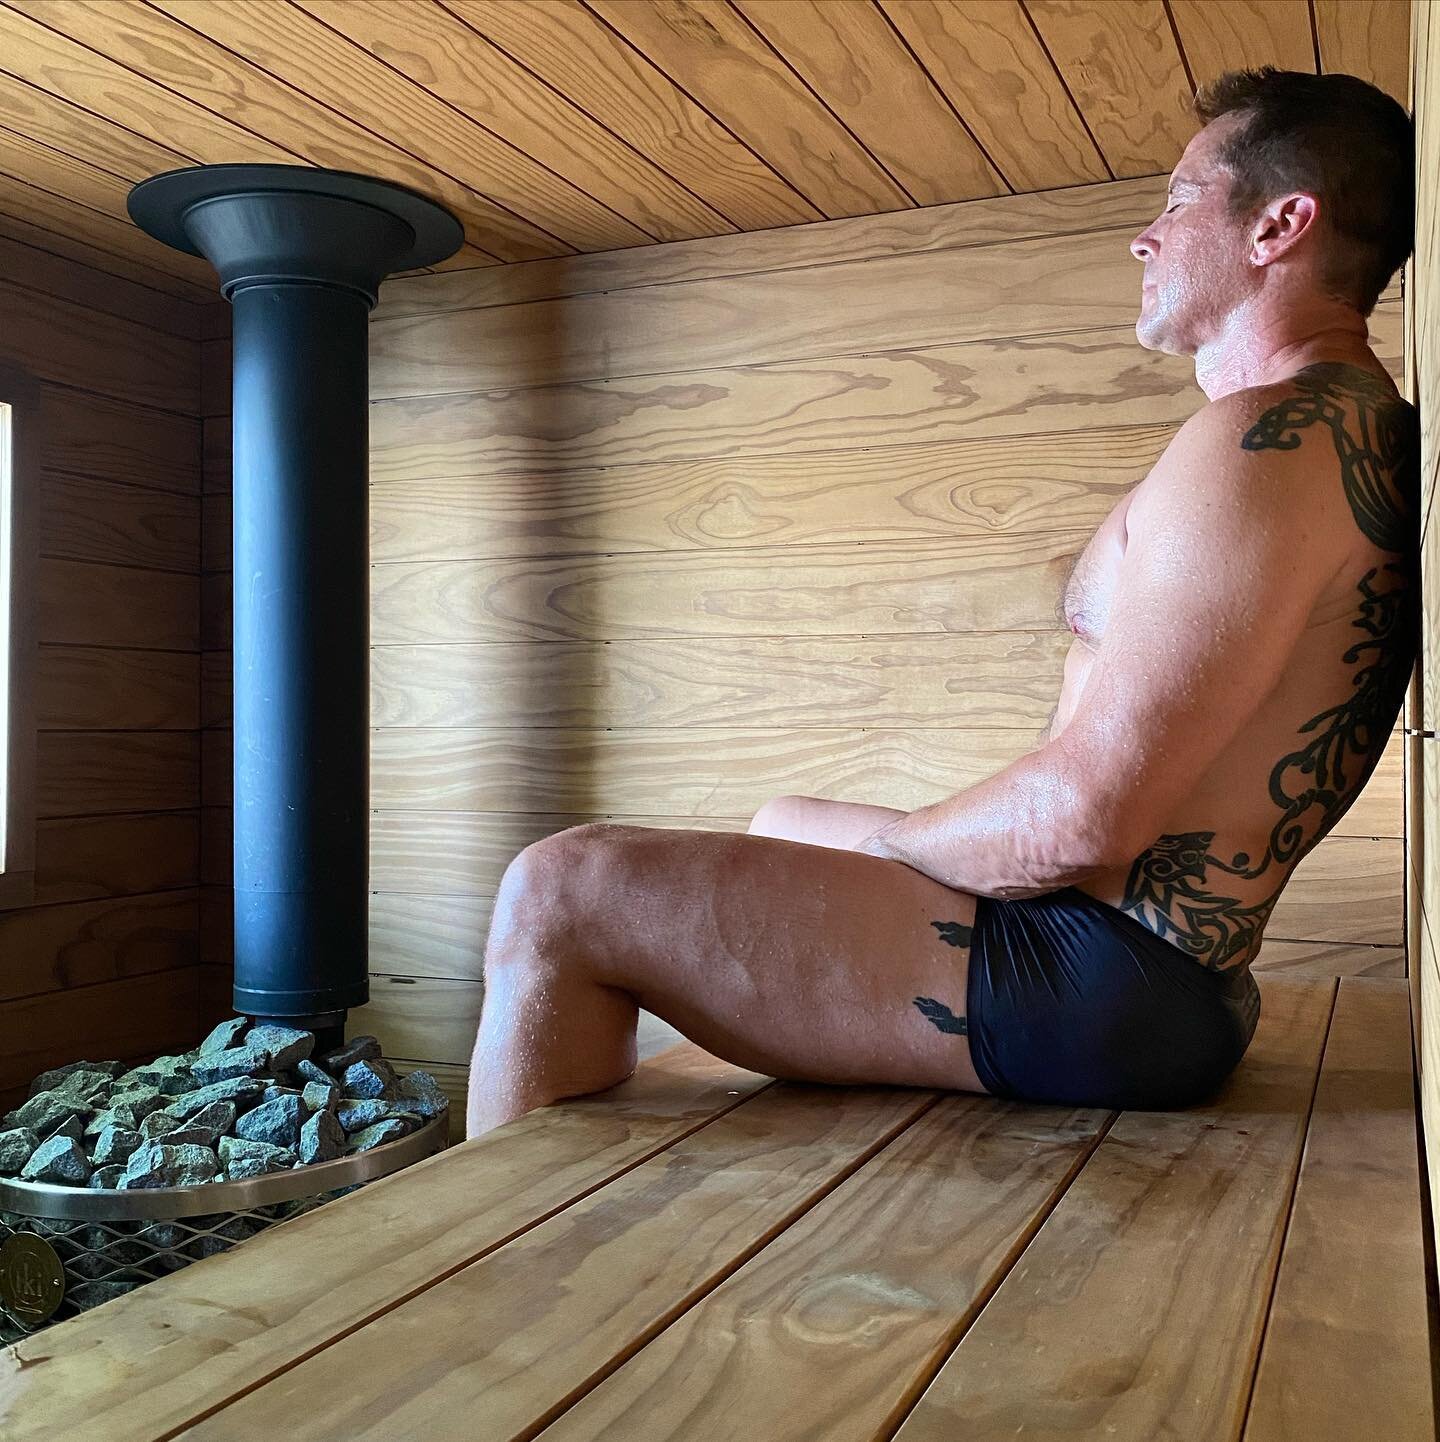 A sanctuary for dreaming your dreams. 
#bisonhut 
#traditionalsauna 
#woodfiredsauna 
#customsauna
#privatesanctuary 
#aplaceofmyown